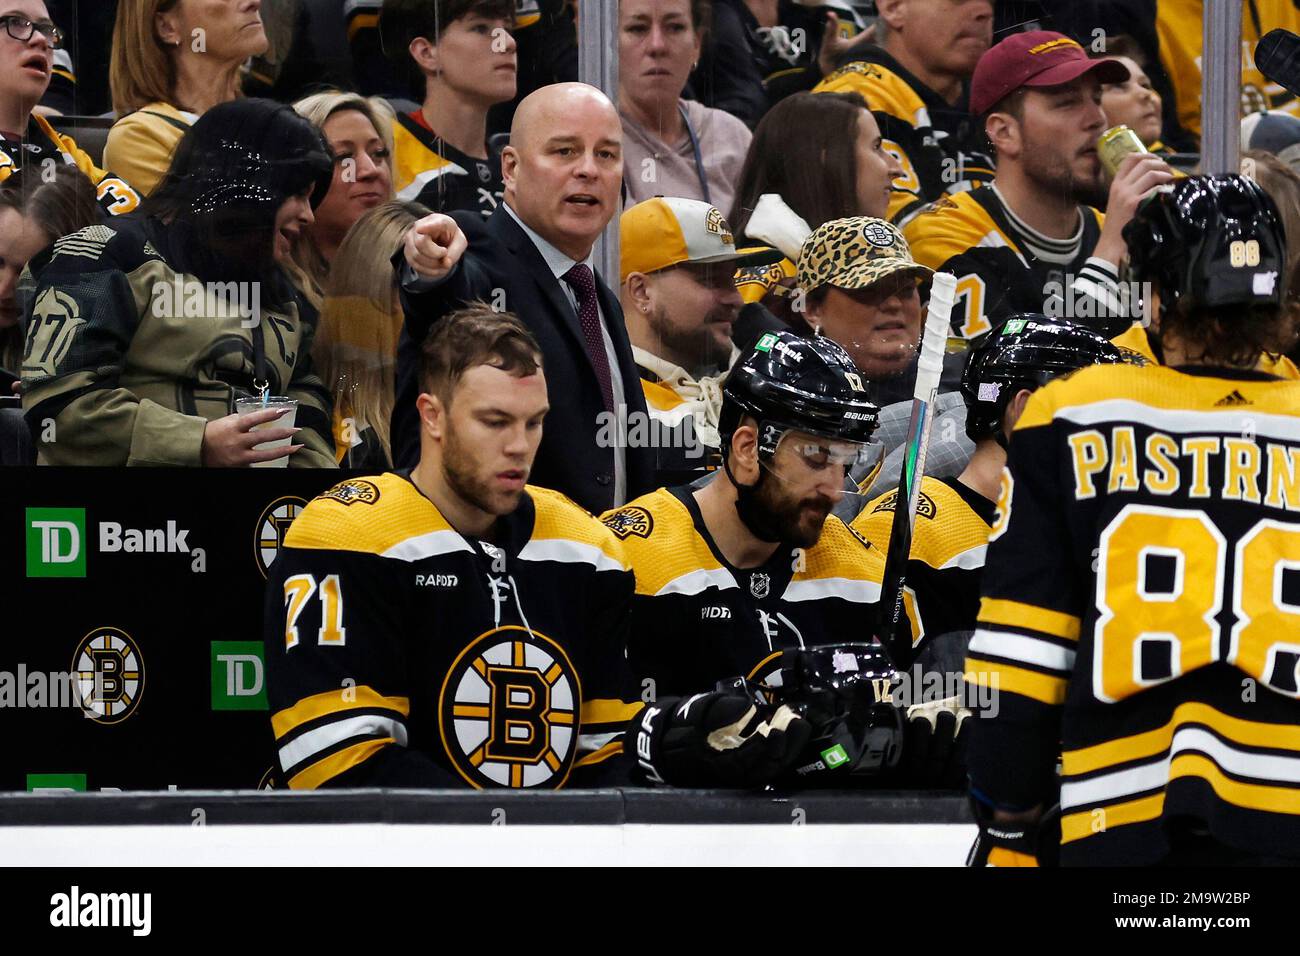 Boston Bruins head coach Jim Montgomery directs his players during the third period of an NHL hockey game against the Vancouver Canucks Sunday, Nov